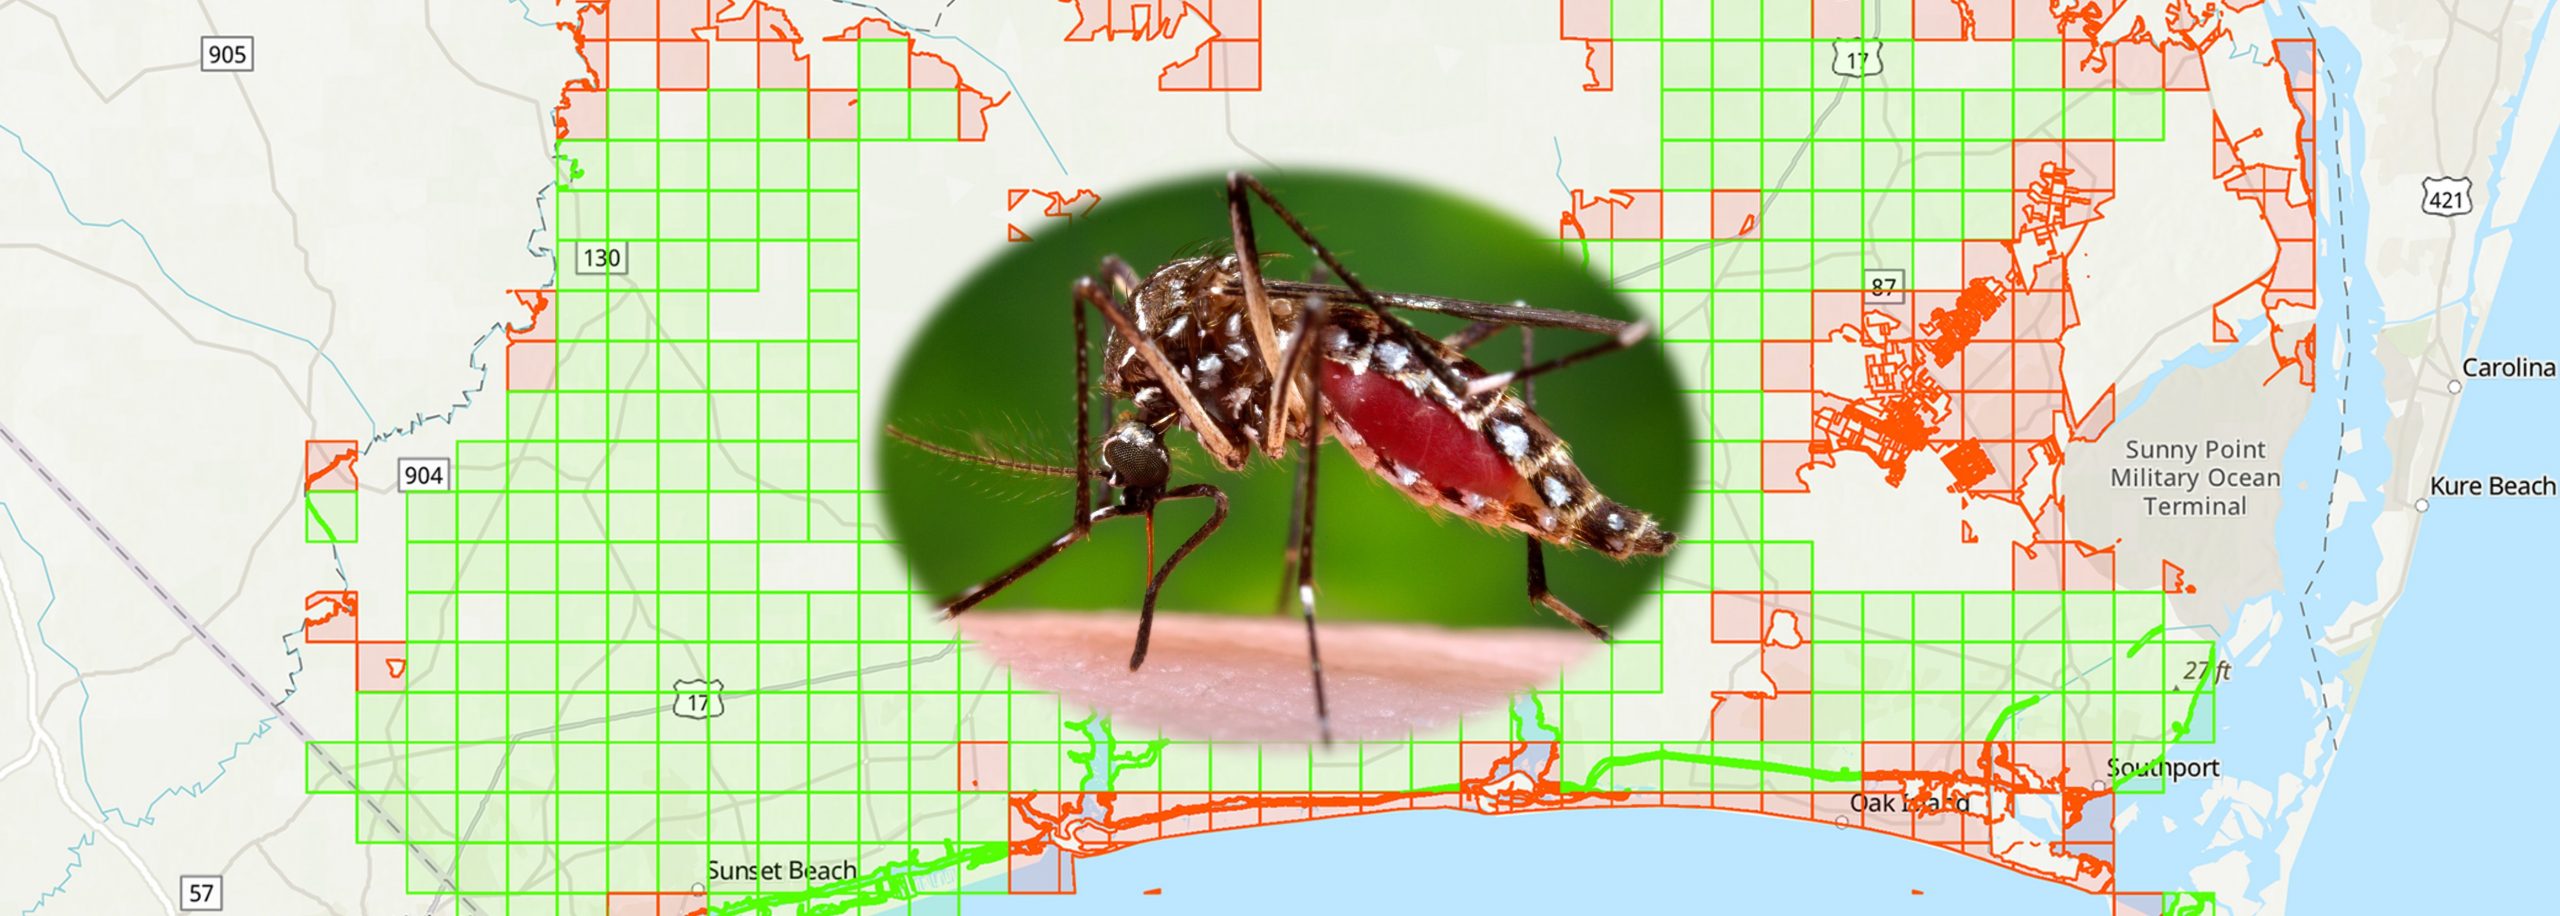 You are currently viewing Geographic information system protocol for mapping areas targeted for mosquito control in North Carolina